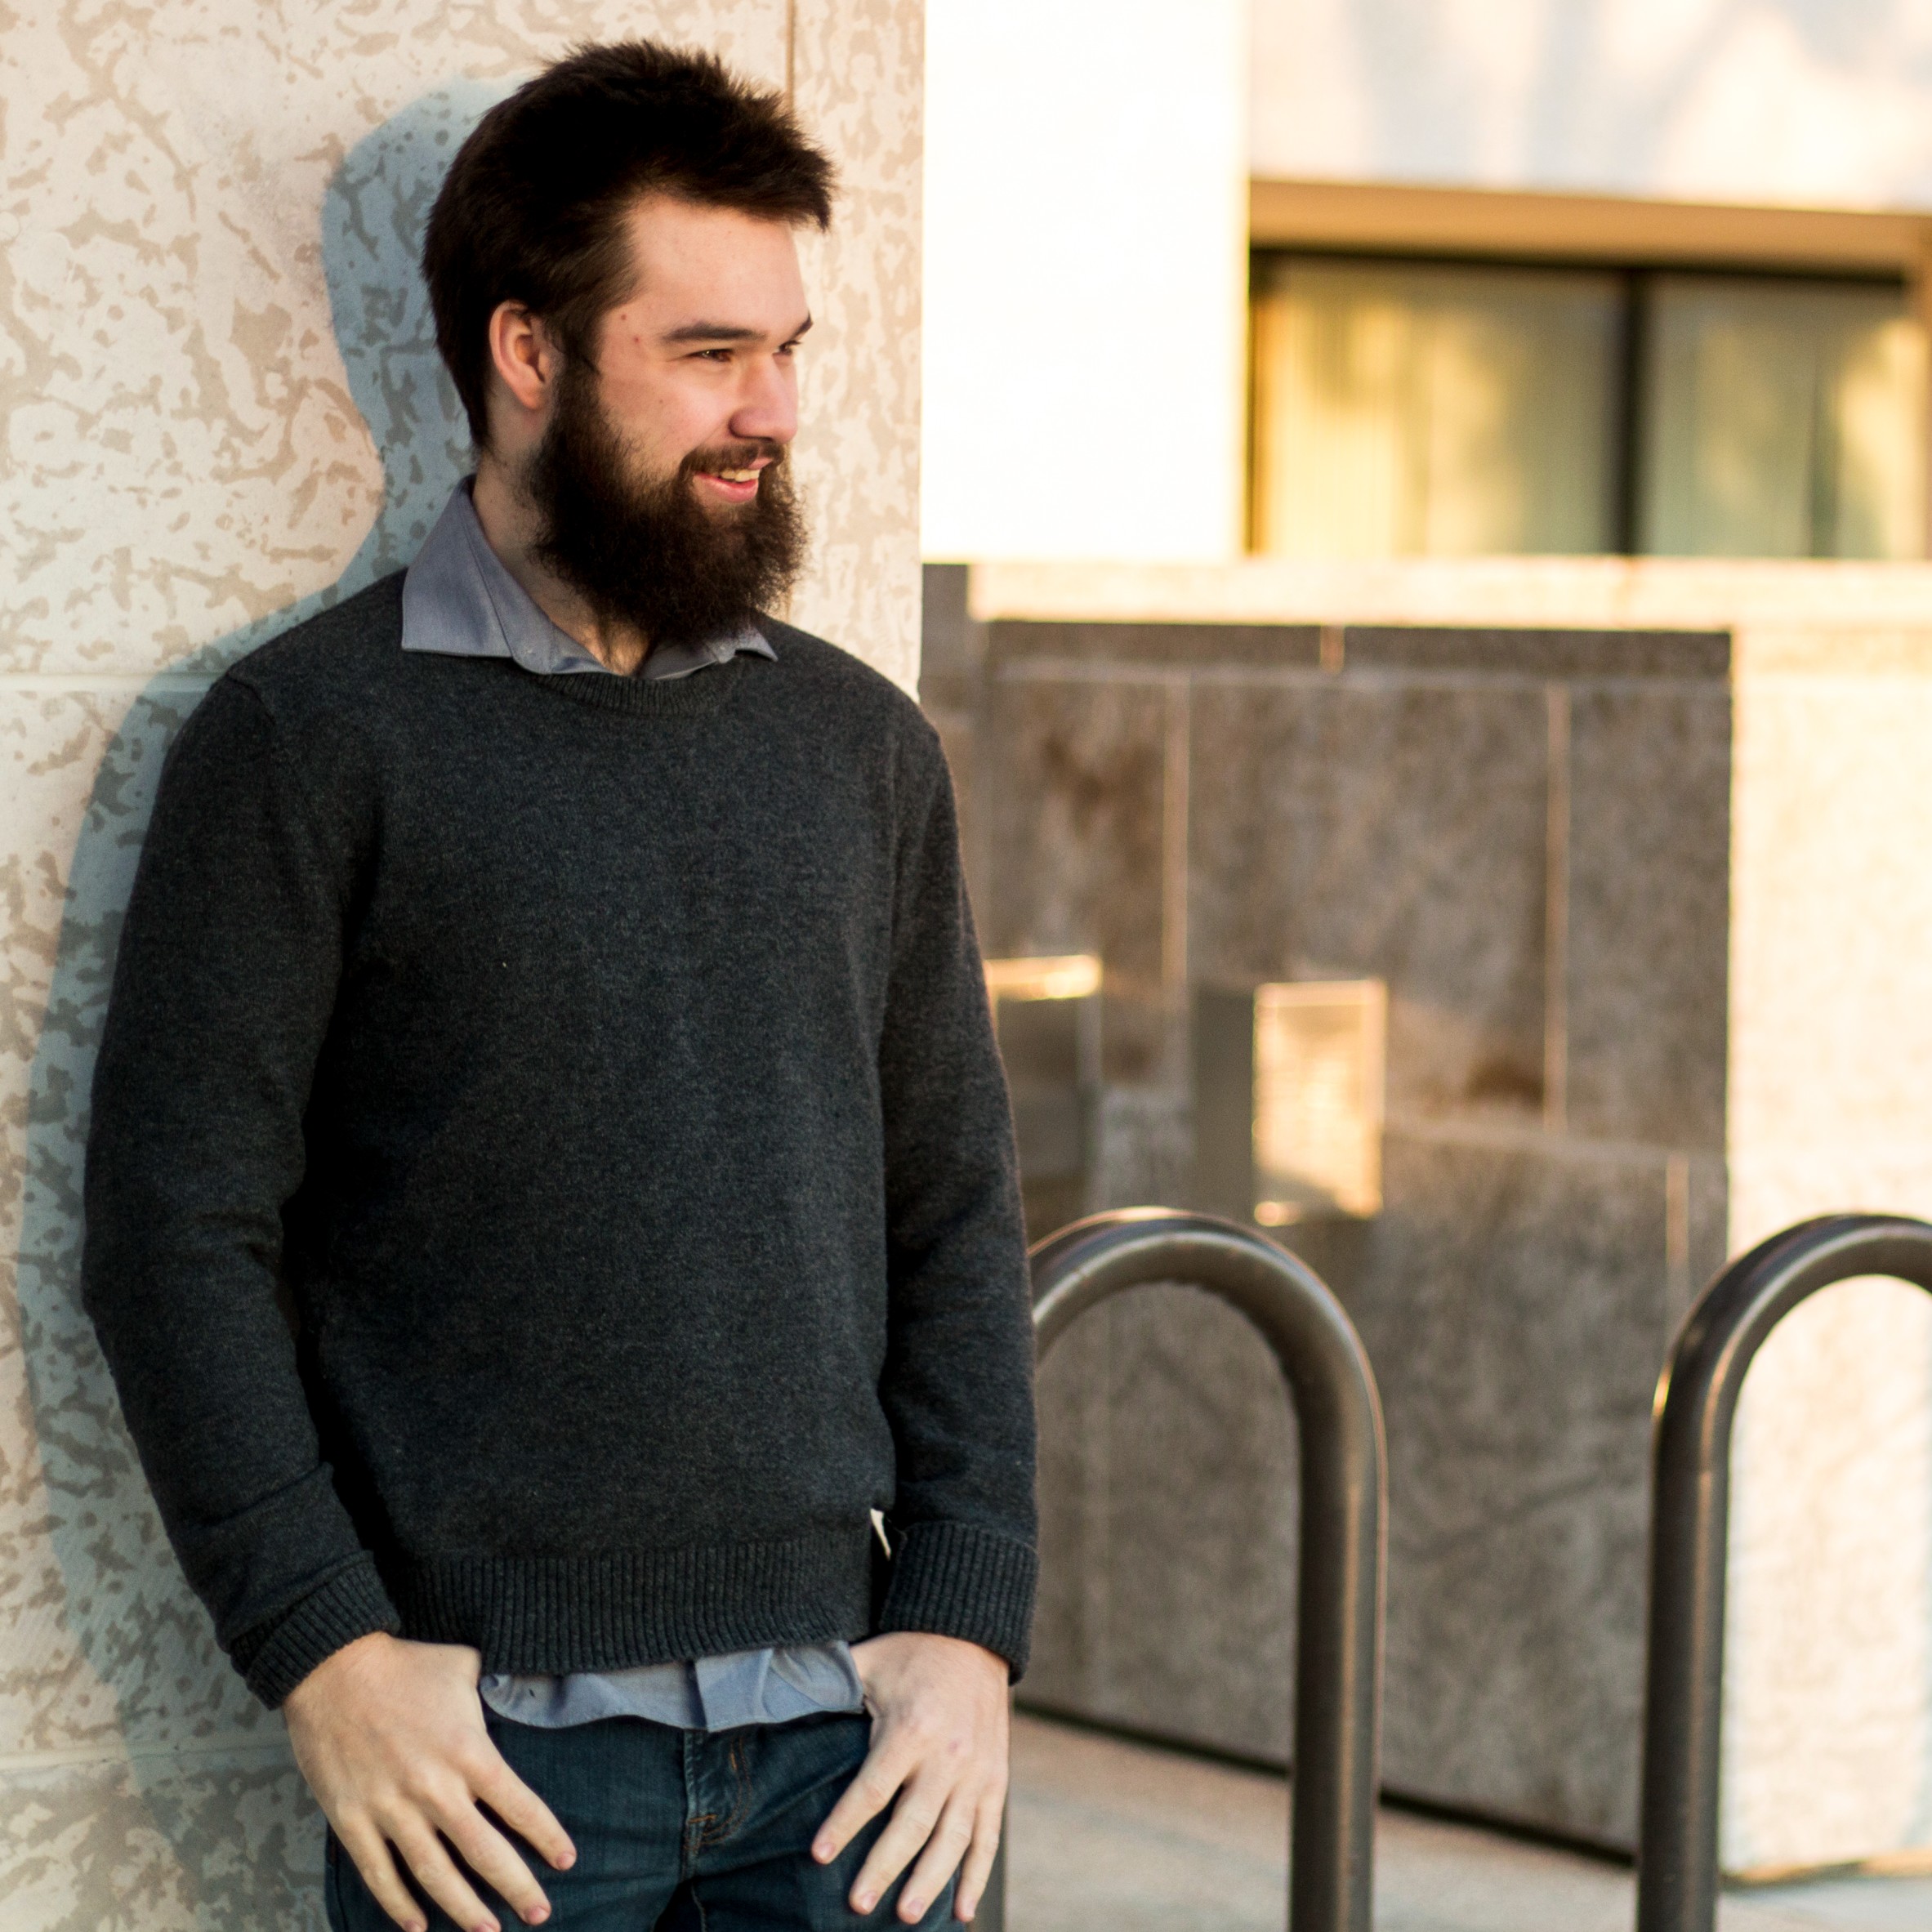 John Loeppky- White make leaning against a wall. He as short hair, a beard and wearing a plaid collar shirt with a black sweater over it and jeans, His thumbs are hooked in his pockets.